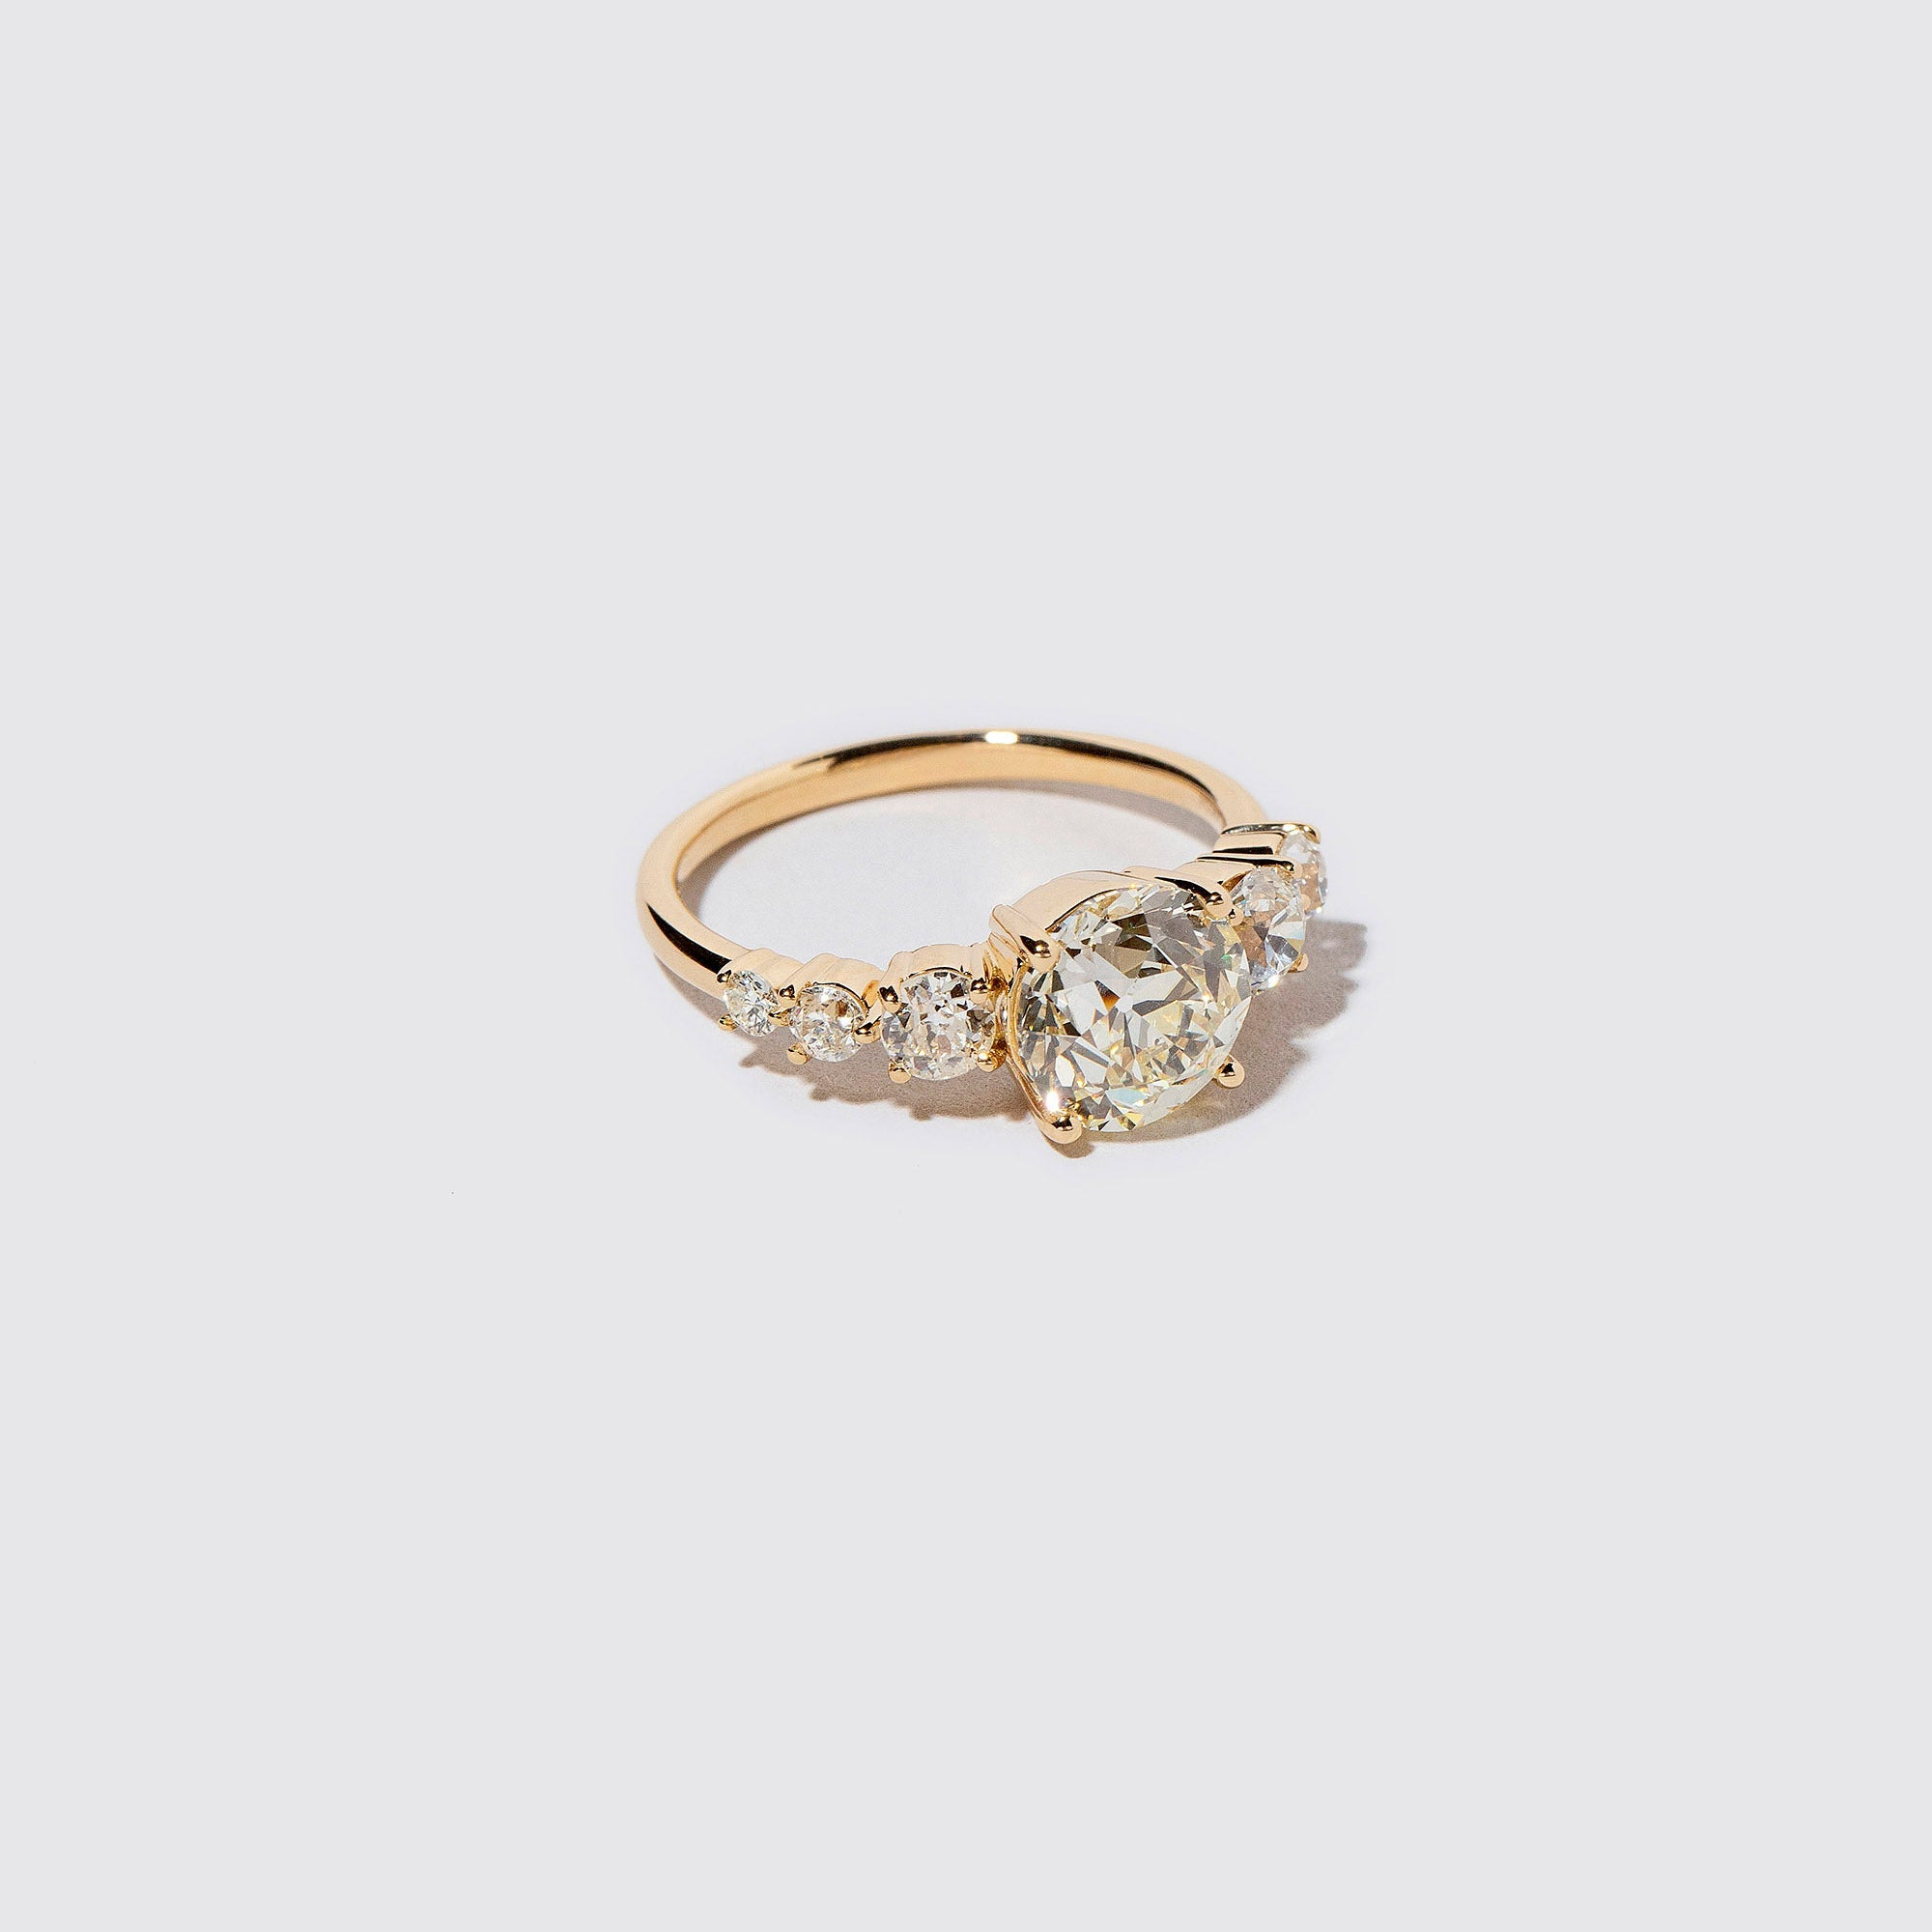 product_details::Auriga Ring - White Diamond on light color background.